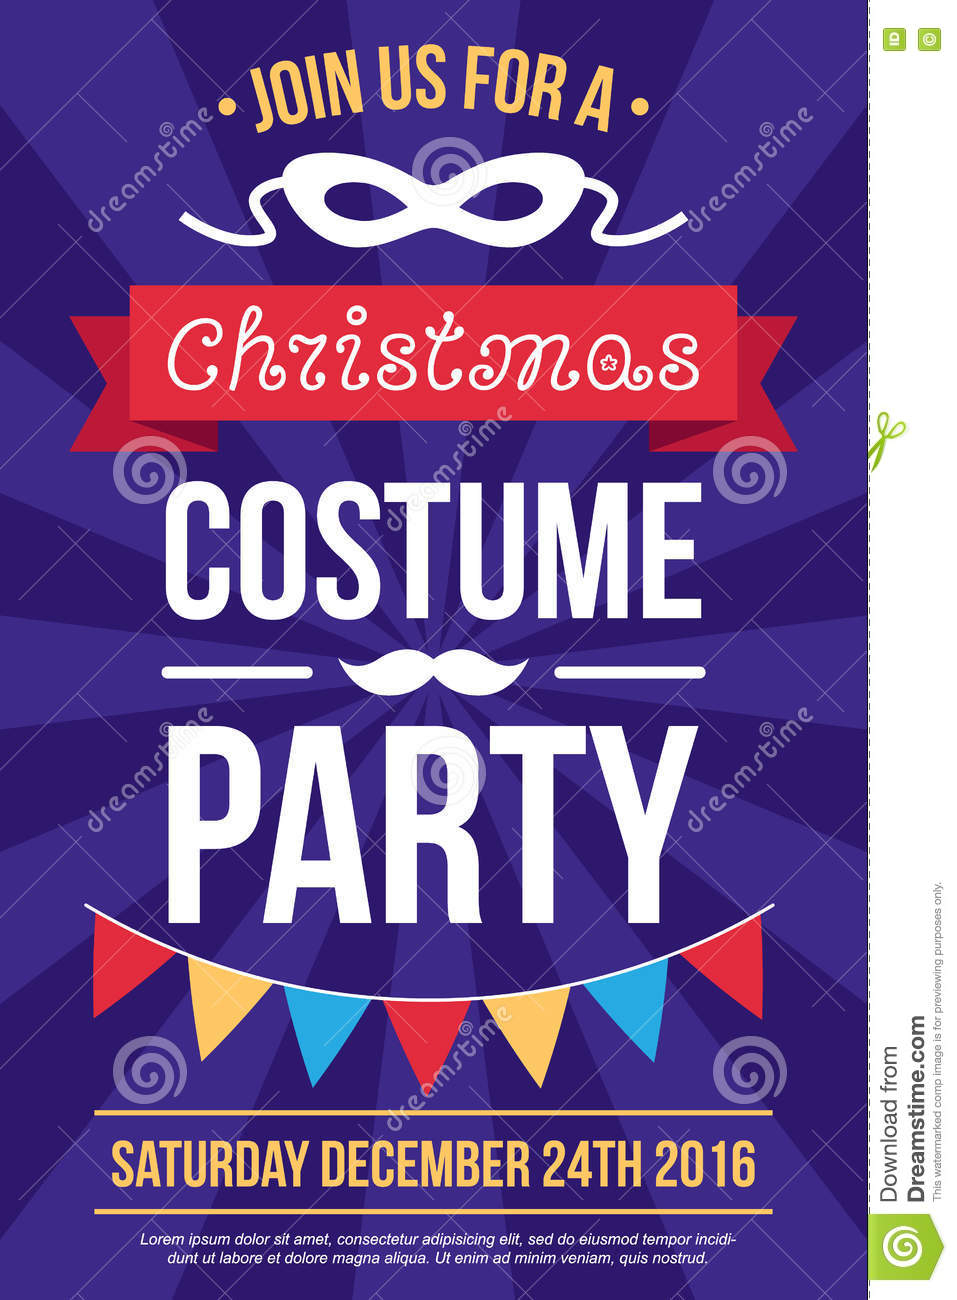 Christmas Costume Party Invitation Stock Vector - Illustration of  Regarding Costume Party Flyer Template Regarding Costume Party Flyer Template